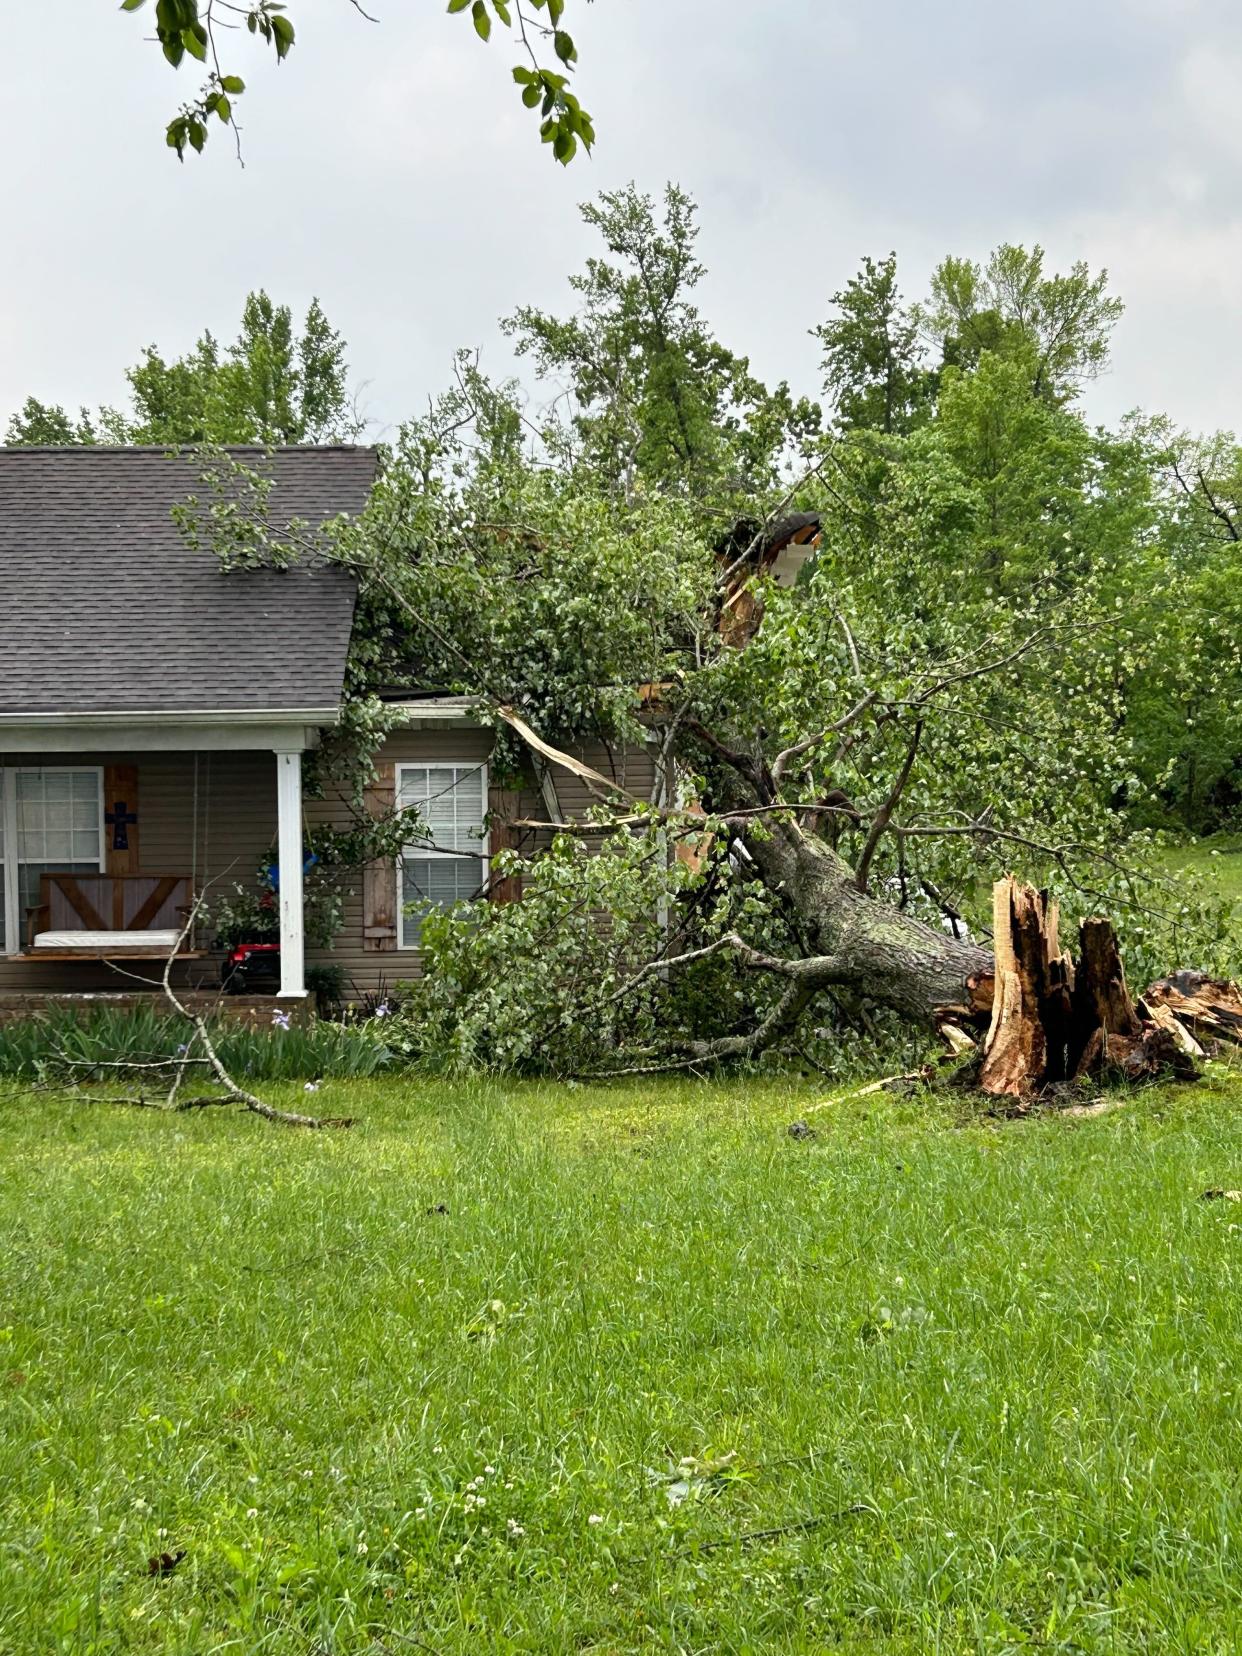 A fallen tree on a house is photographed Wednesday on the central northern border of Tennessee after a line of severe weather brought storms and a likely tornado to the area. More than 150,000 households and businesses remain without power across parts of Tennessee and North Carolina on Thursday morning, according to a USA TODAY outage tracker.